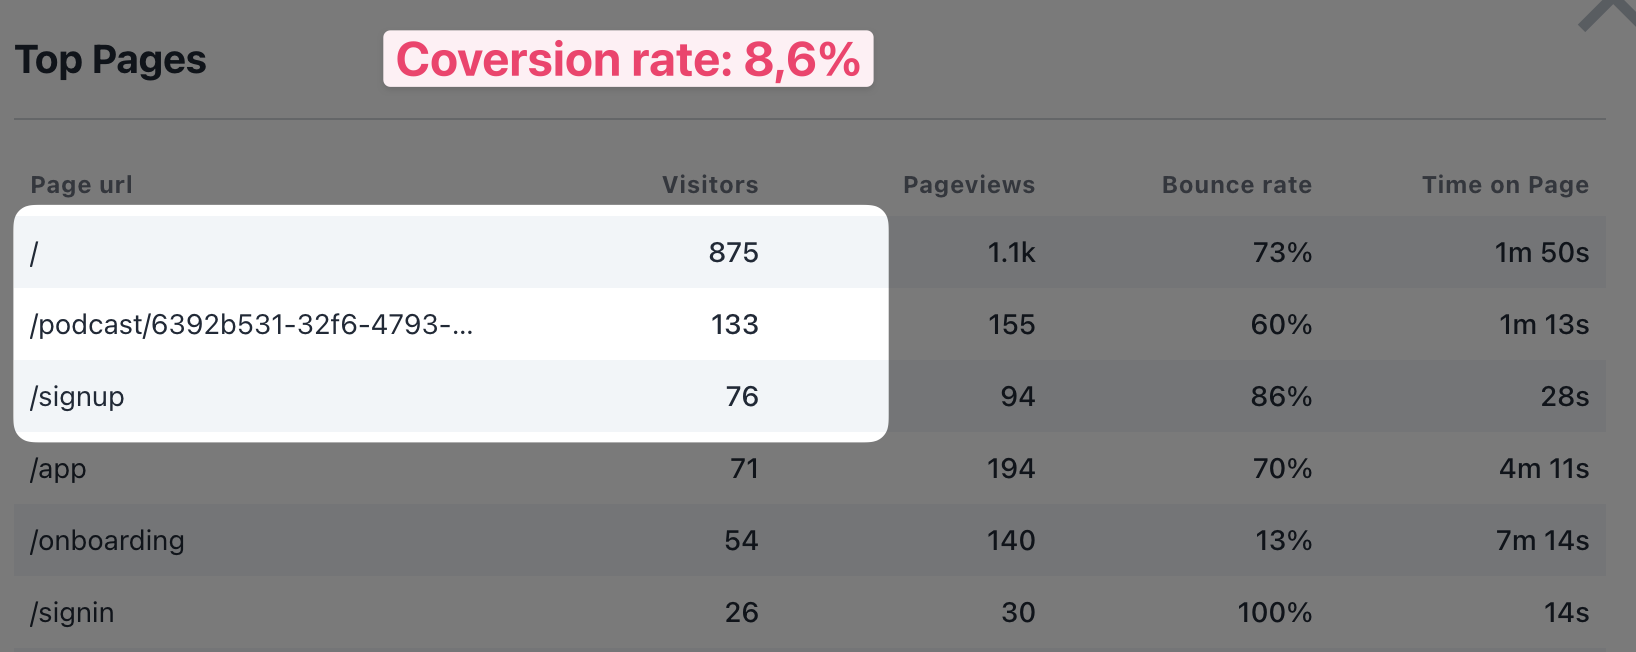 Signup conversion rate